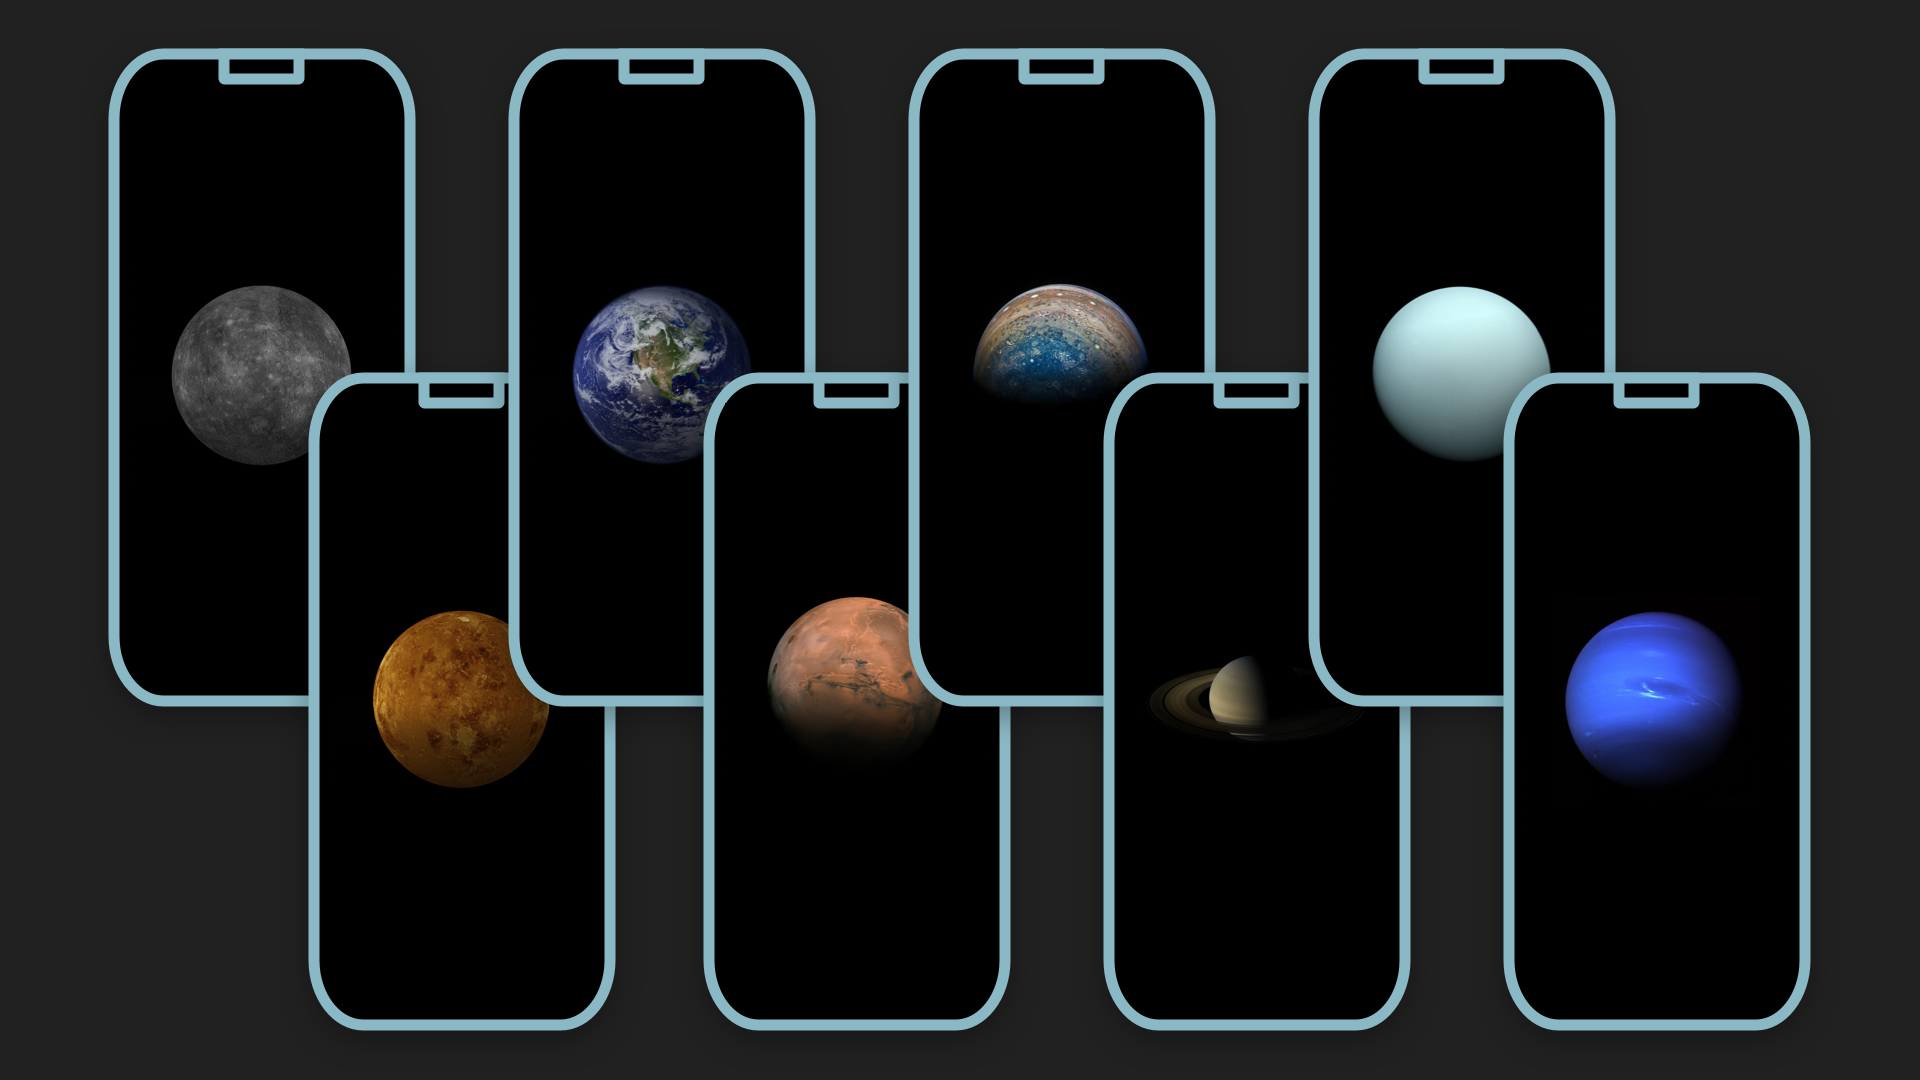 New high res iphone wallpapers for each planet